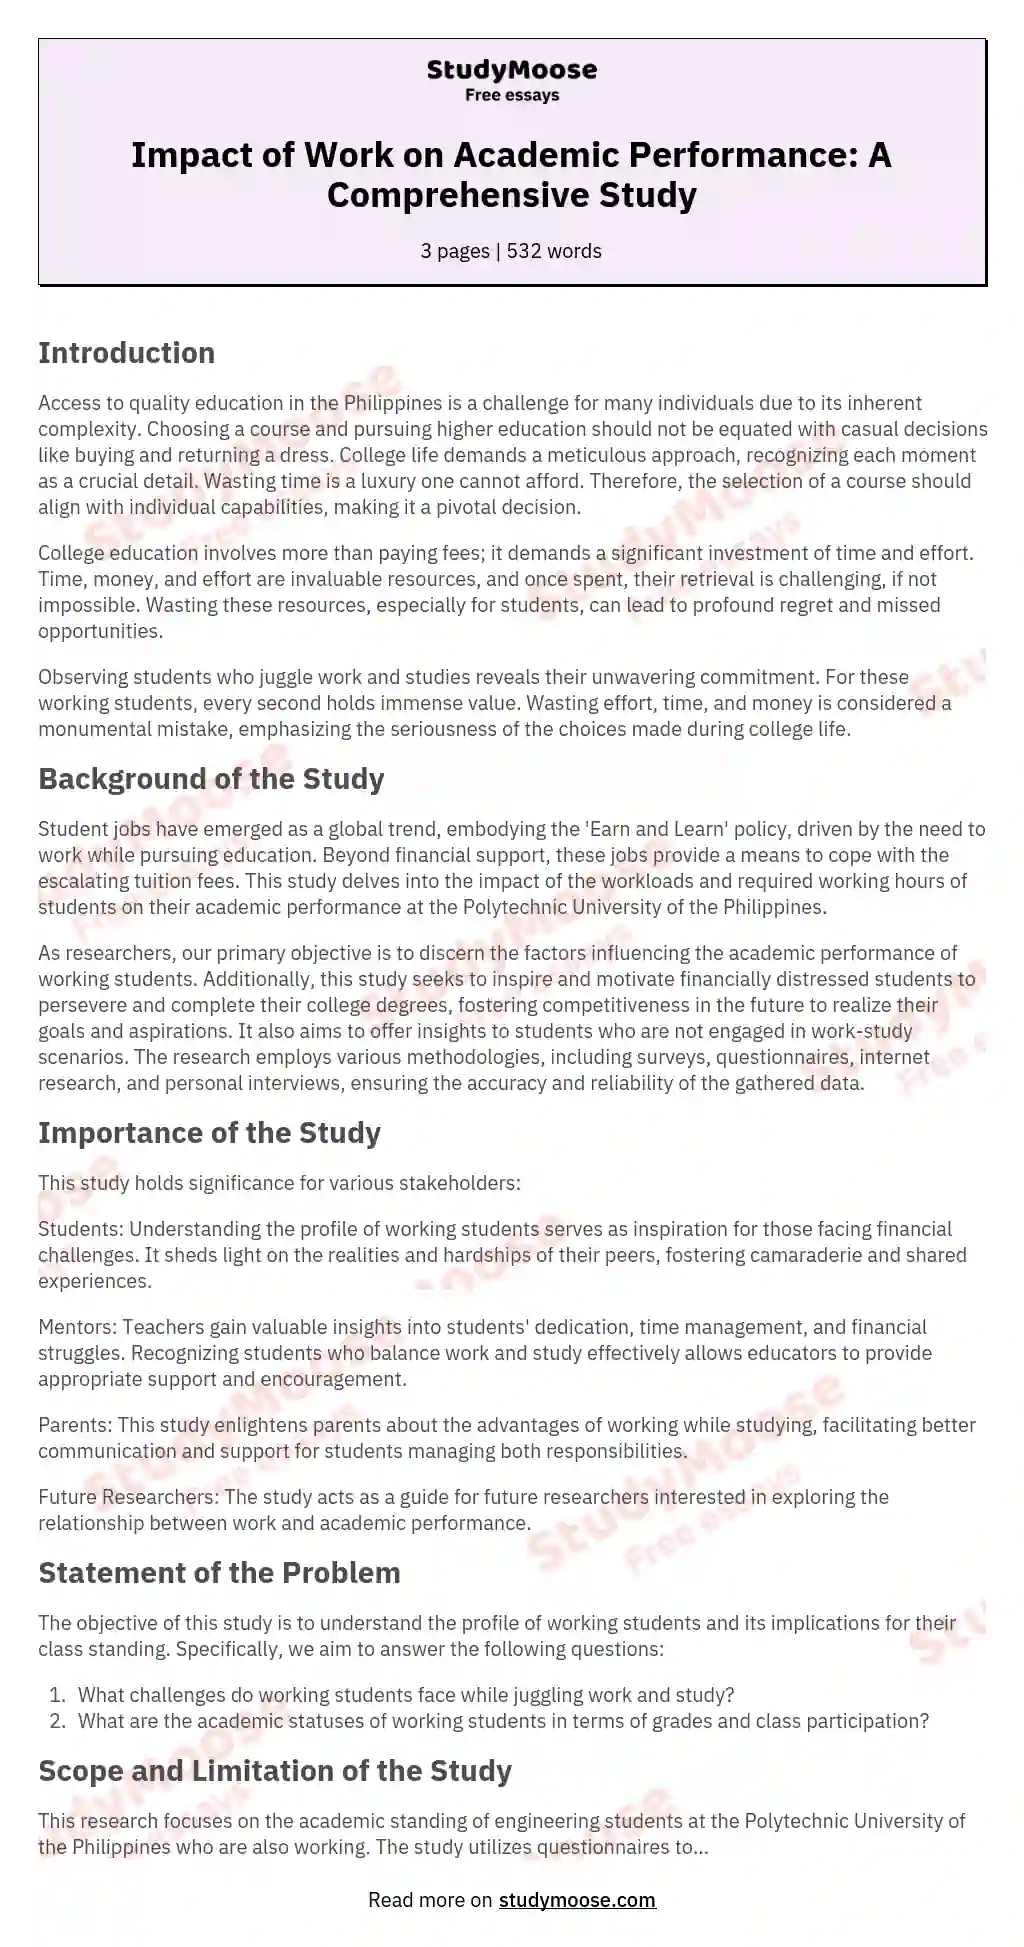 Impact of Work on Academic Performance: A Comprehensive Study essay